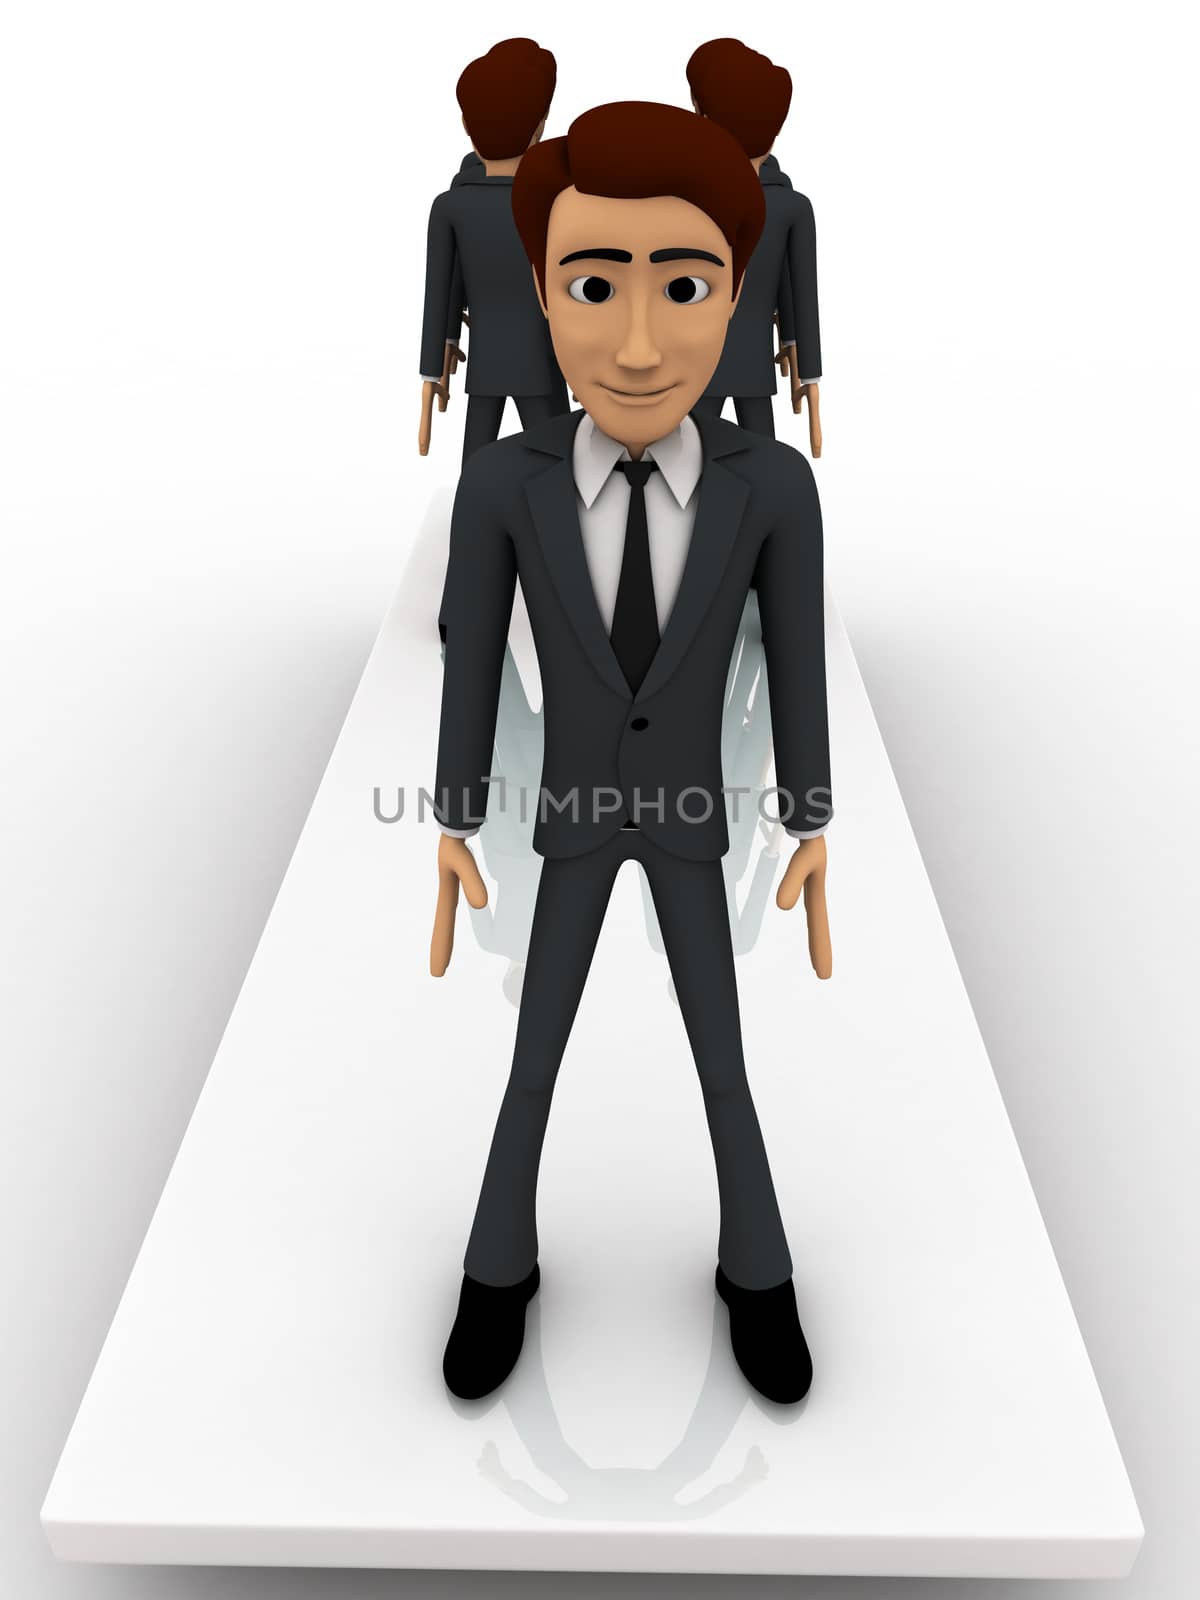 3d men standing seesaw one man on on side and group of men on other side concept on white background, back angle view